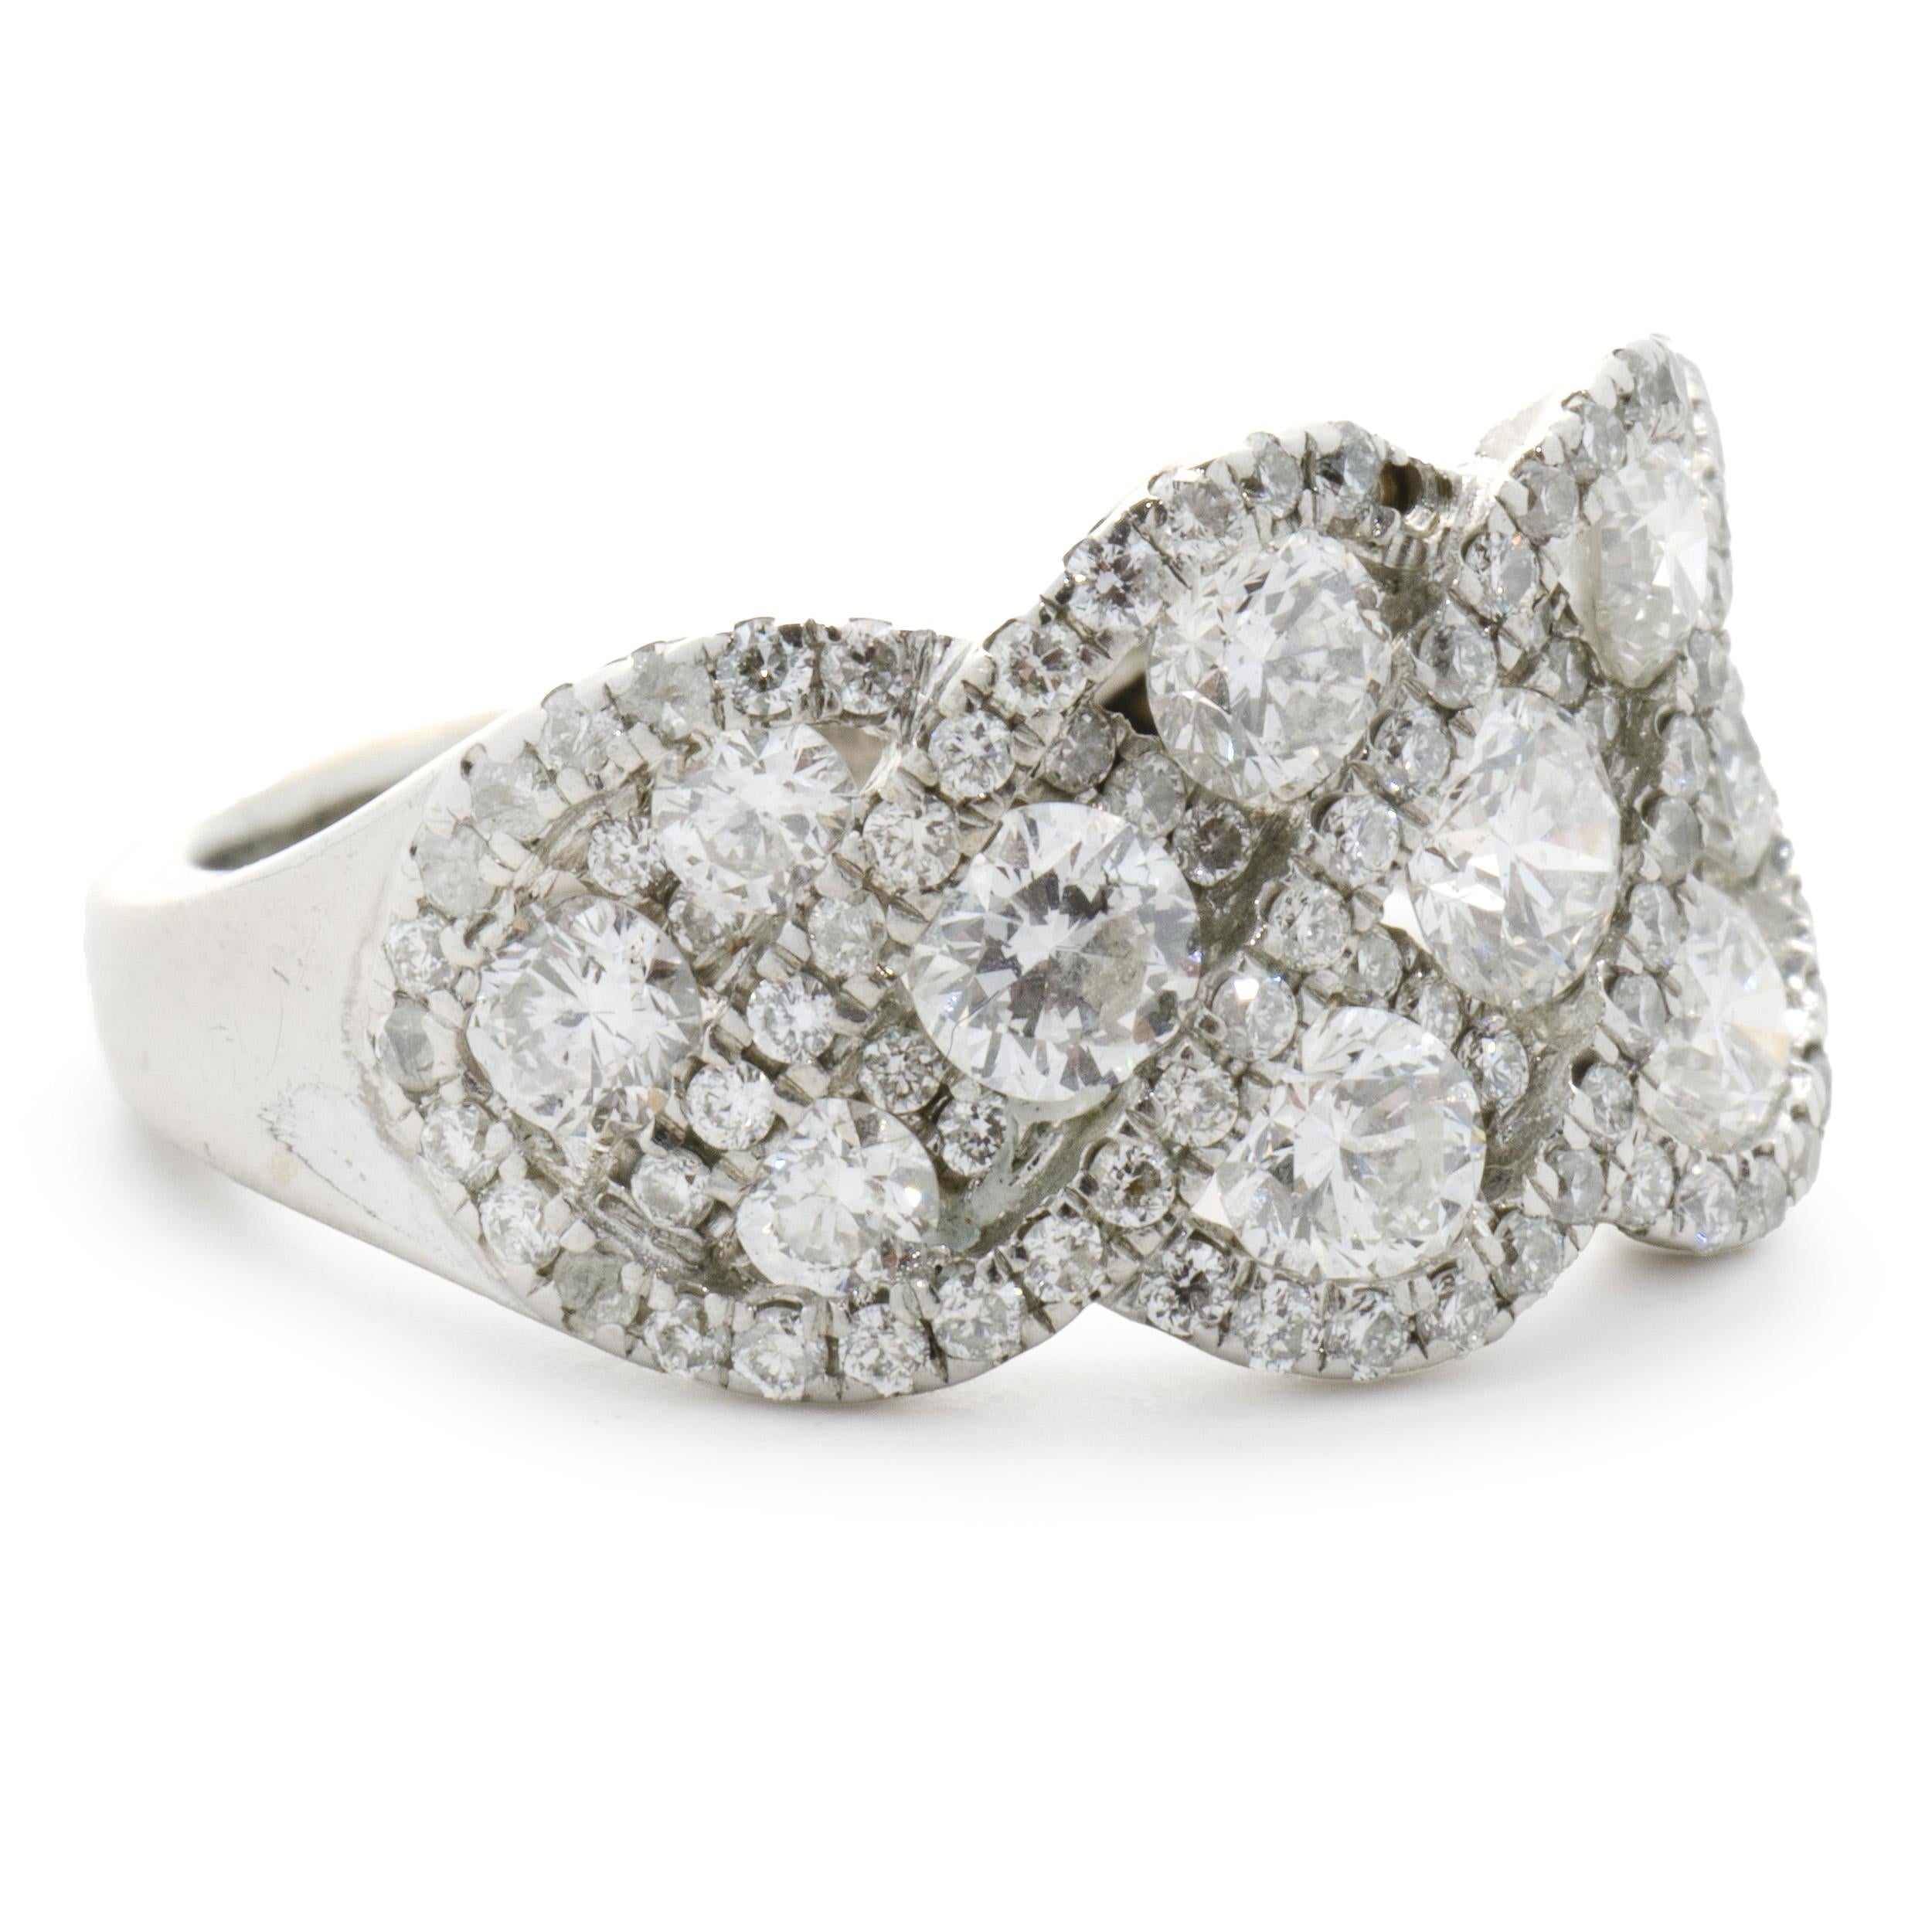 Designer: Gabriel & Co.
Material: 14K white gold
Diamond: 100 round brilliant cut = 1.86cttw
Color: I
Clarity: SI2
Dimensions: ring top measures 10.5mm wide
Weight: 4.57 grams
Size: 5 (complimentary sizing available)